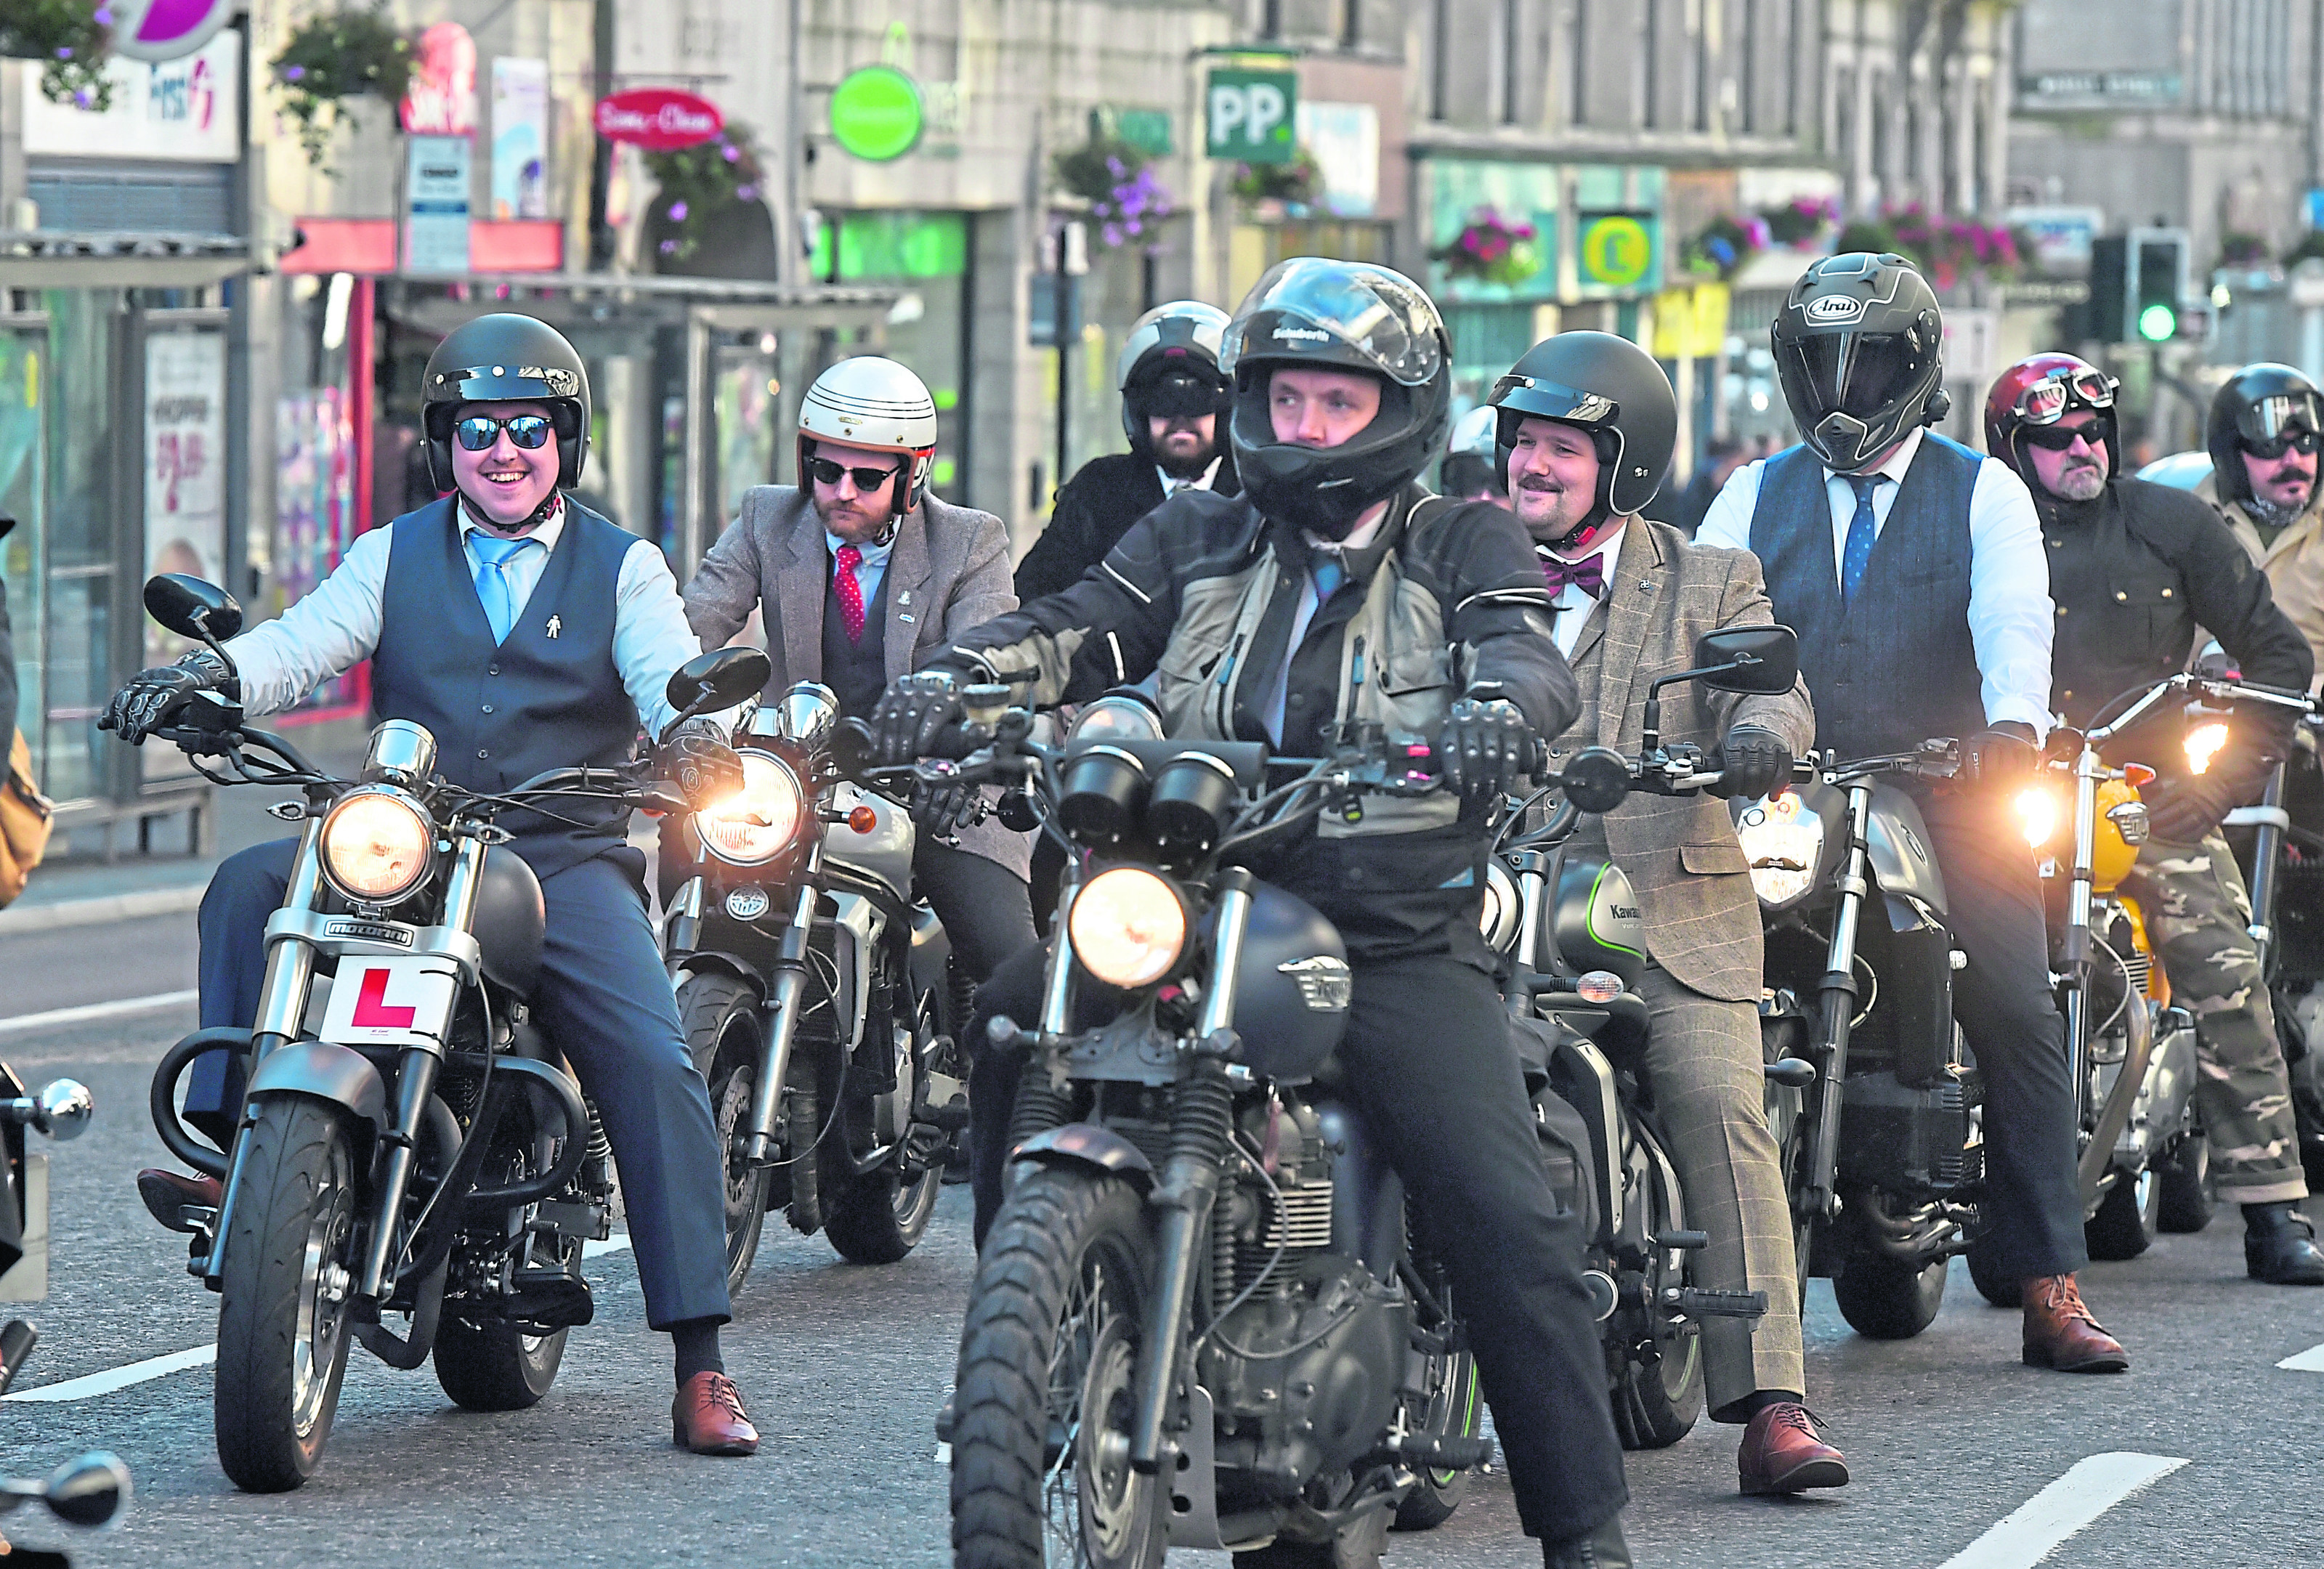 Bikers in suits rode through Aberdeen to raise awareness of prostate cancer.